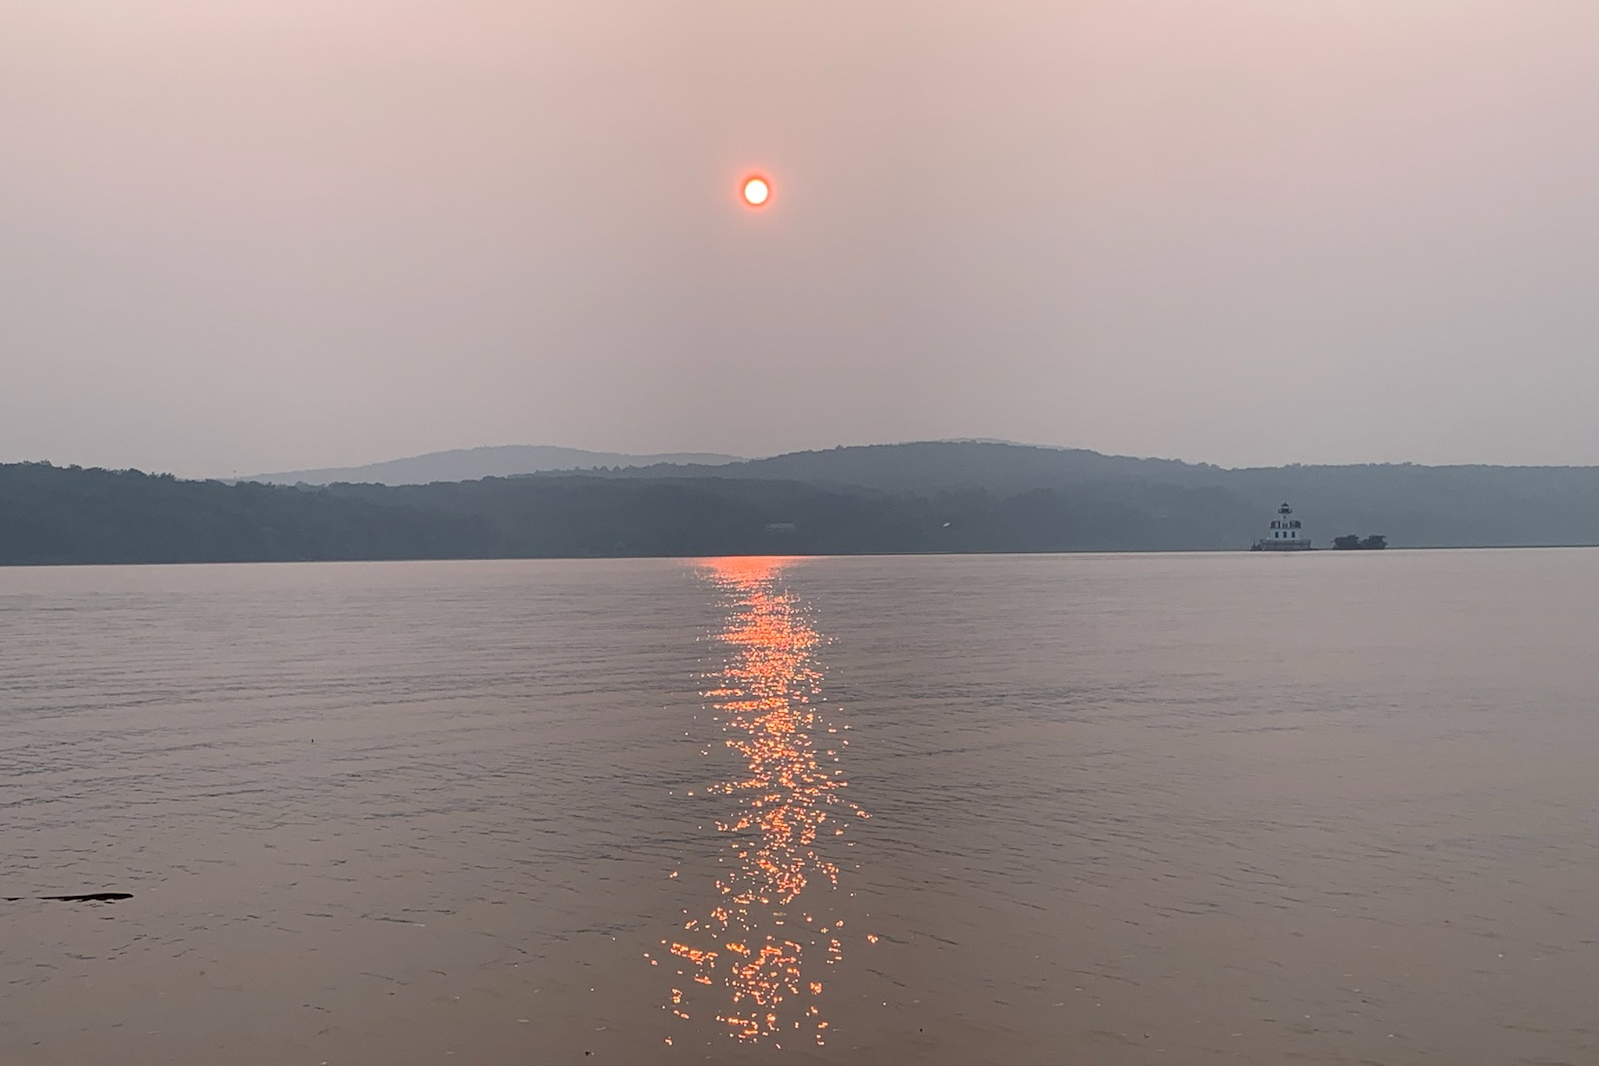 Kingston Air Quality Initiative Detected Potentially Dangerous Levels of Fine Particulate Matter (PM2.5) from Western Wildfire Smoke in Late July